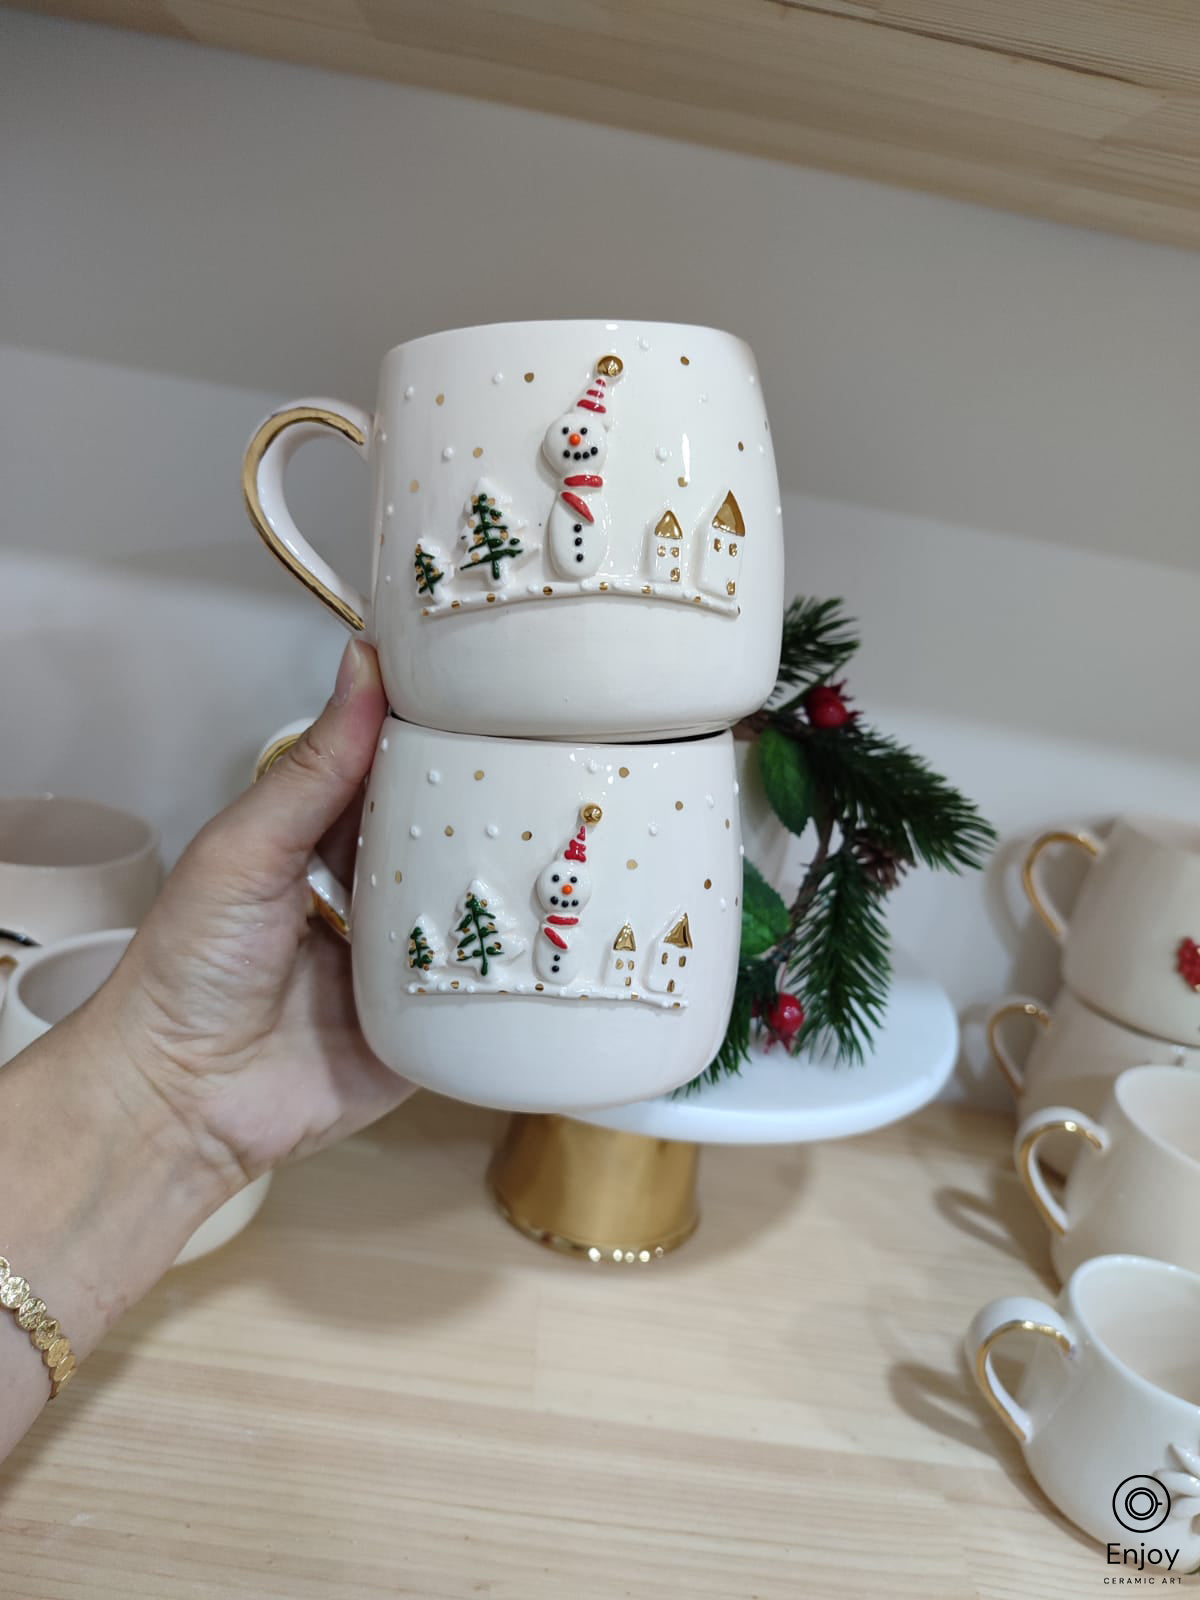 A chic white mugs adorned with a 3D snowman, little houses, trees with gold details on a shelve